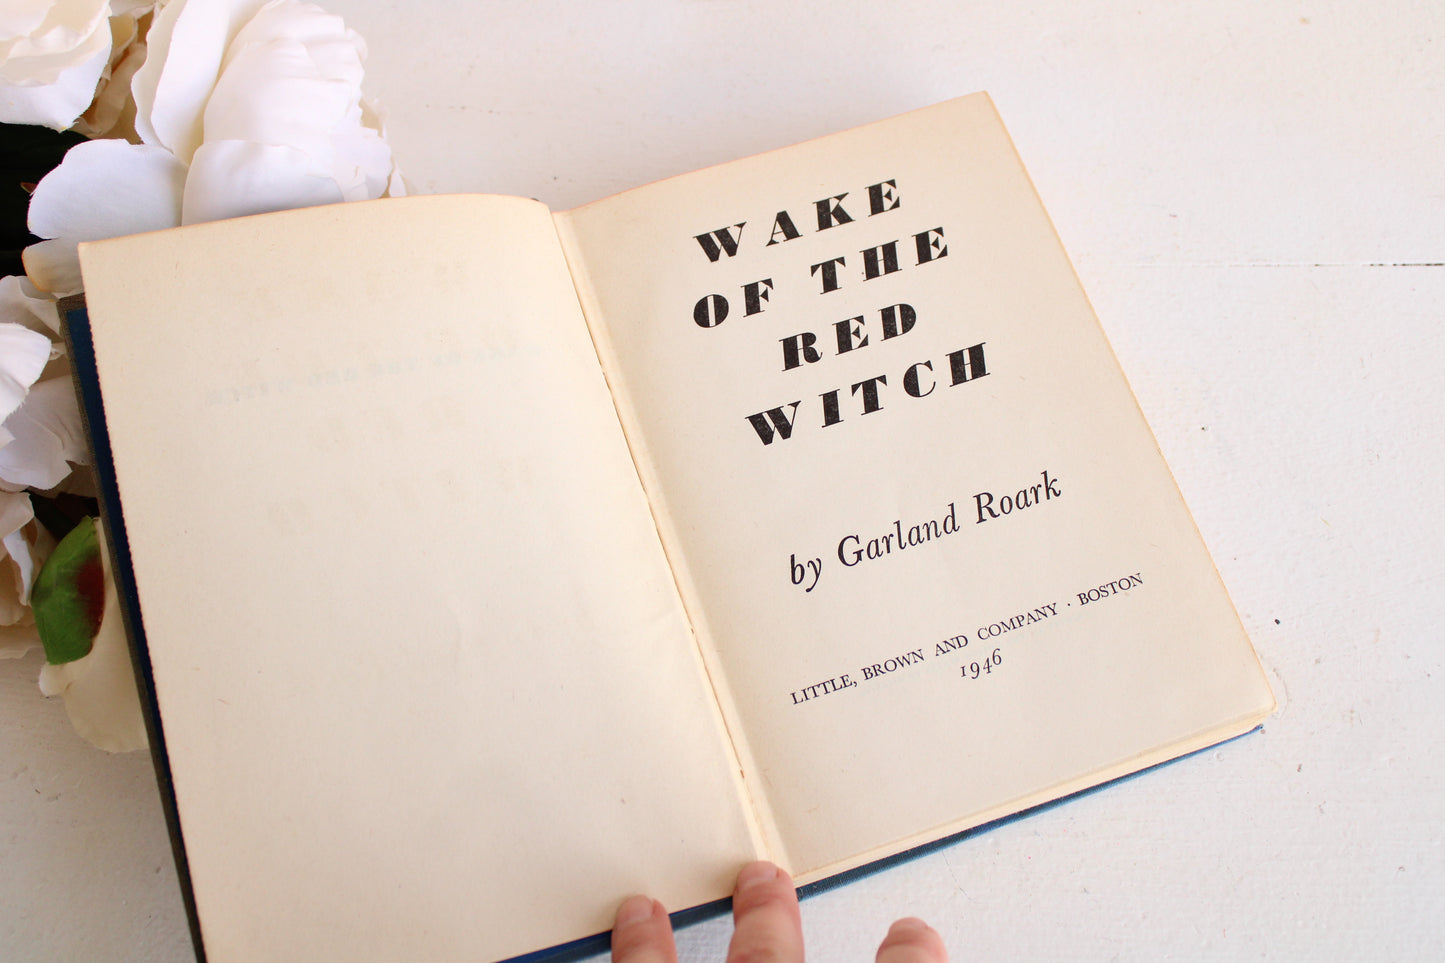 Vintage 1940s Book, "Wake of the Red Witch" by Garland Roark